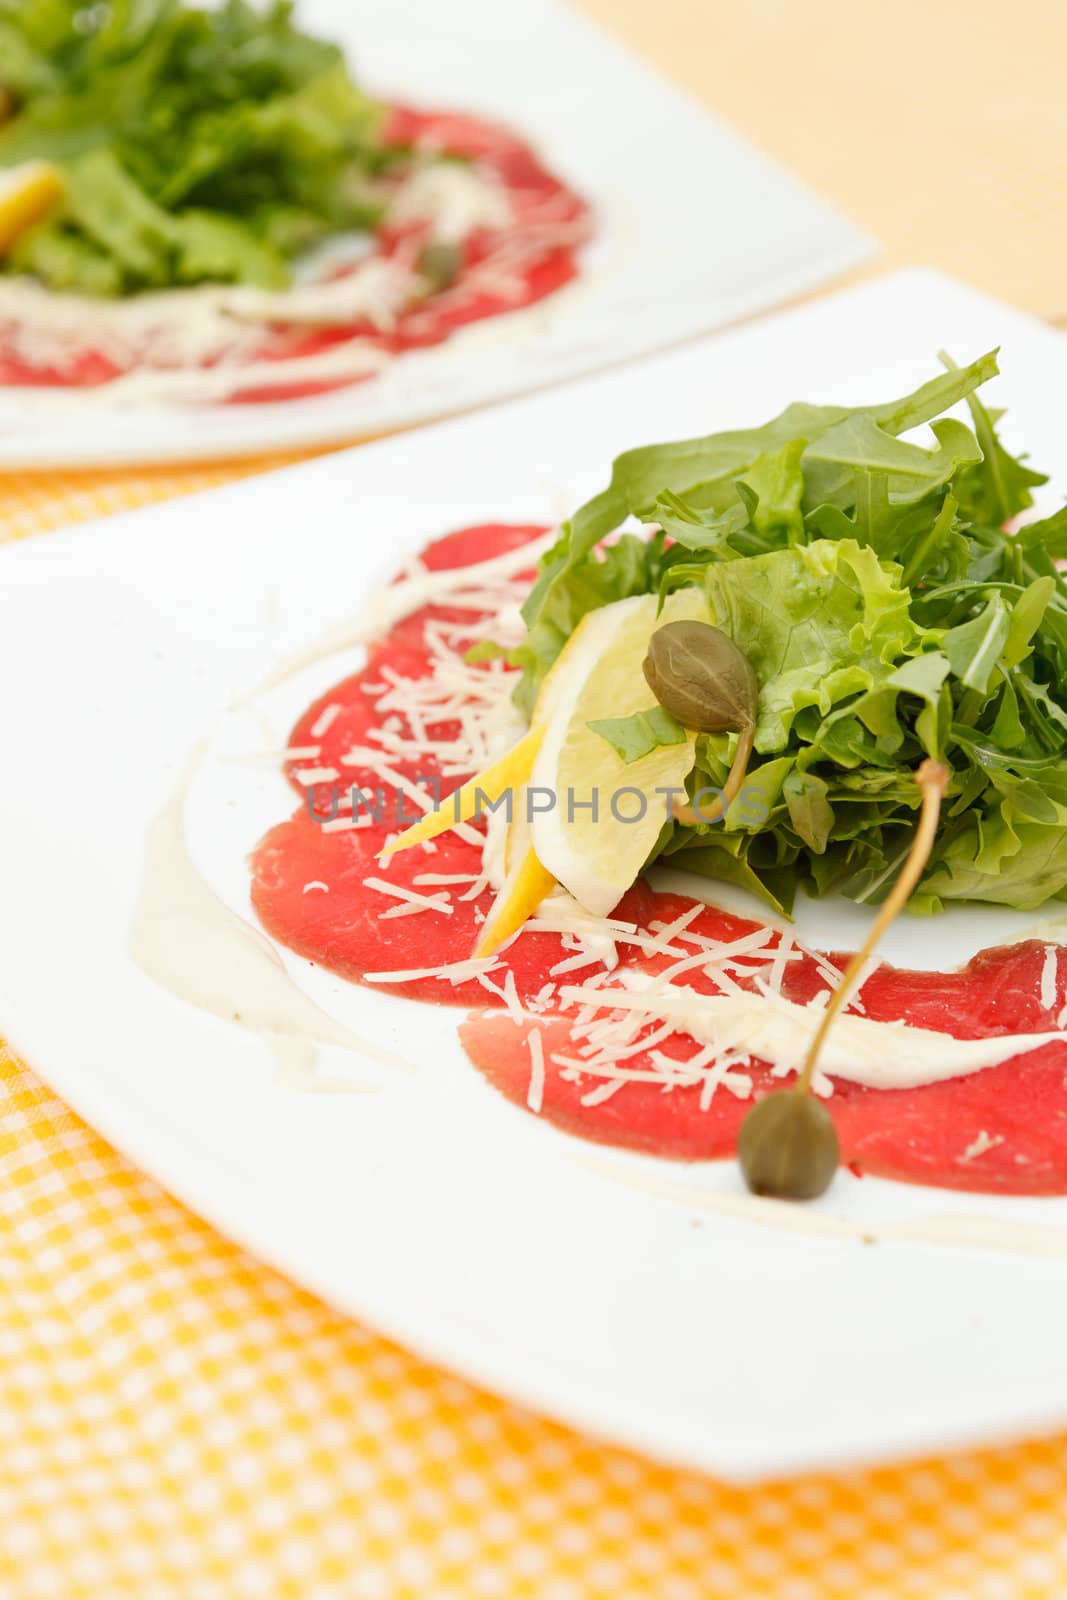 Meat Carpaccio with Parmesan Cheese 